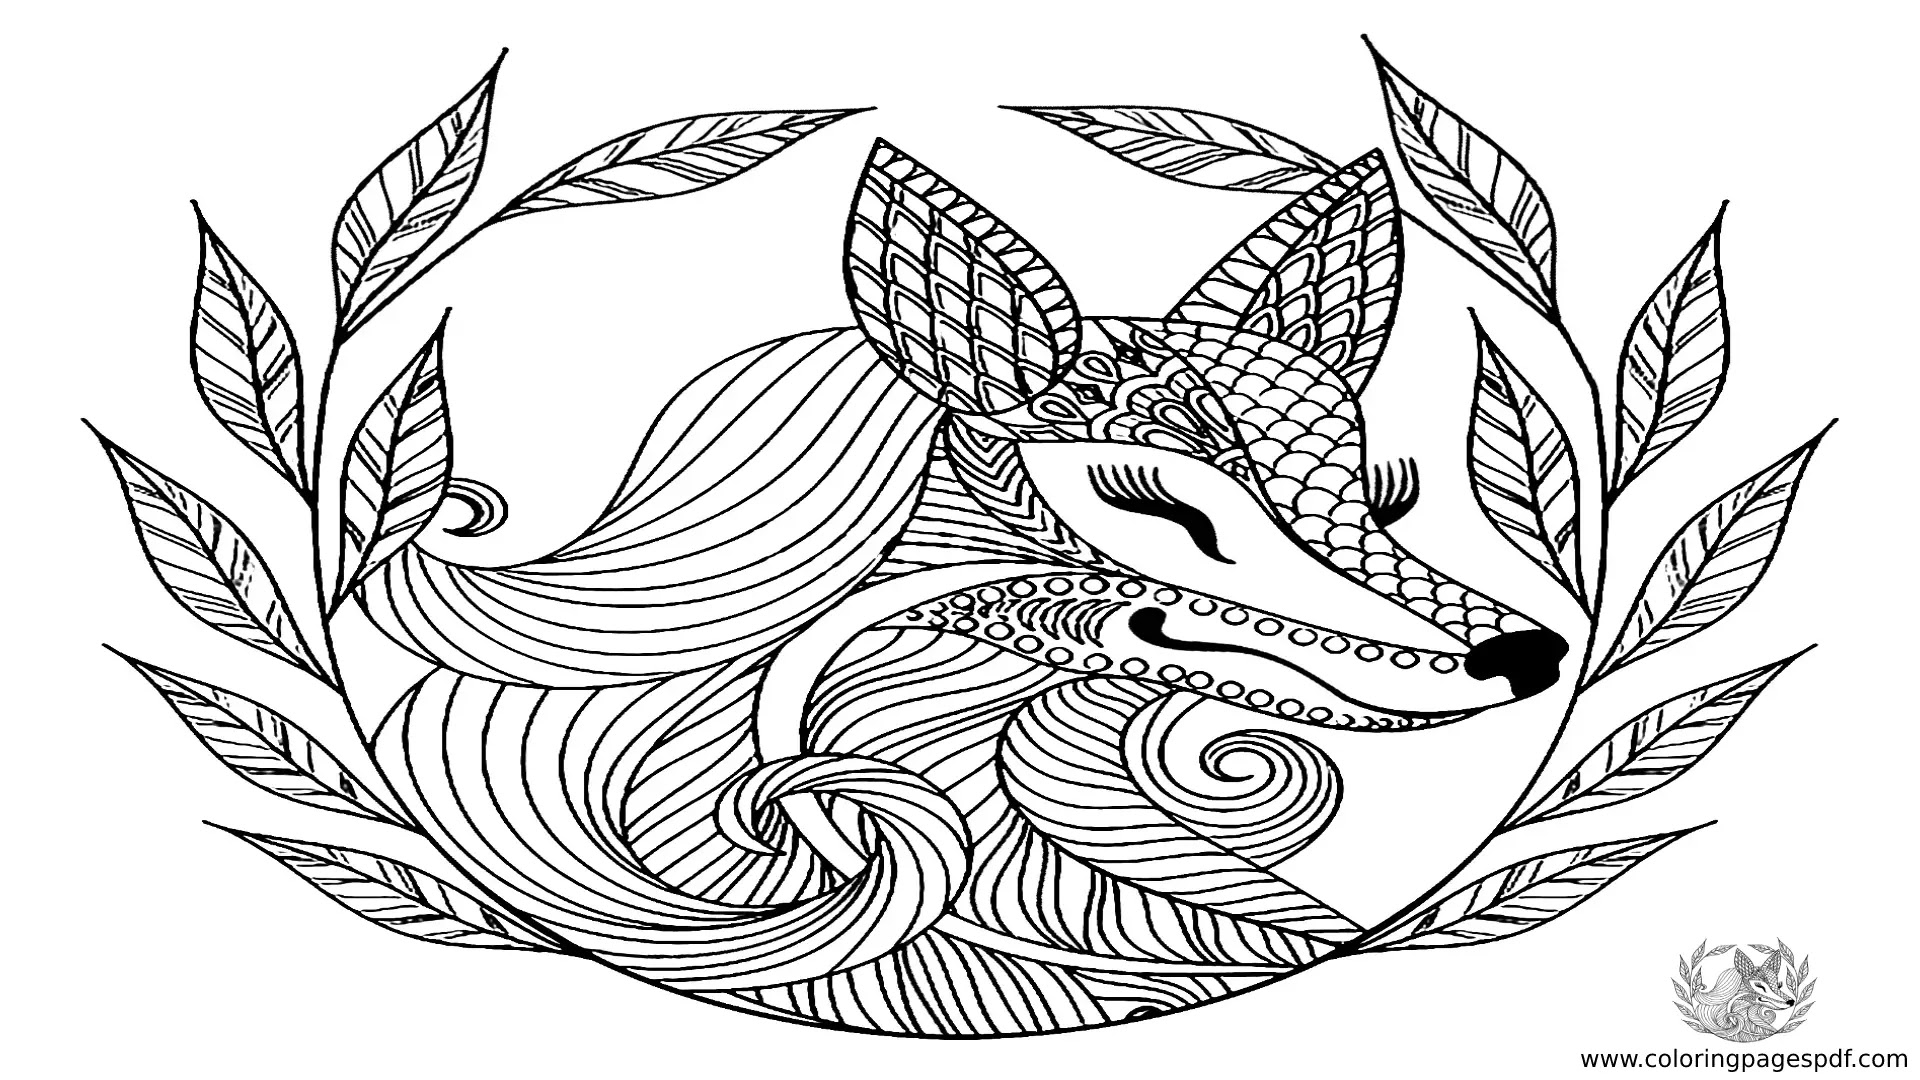 Coloring Pages Of A Fox Head Mandala